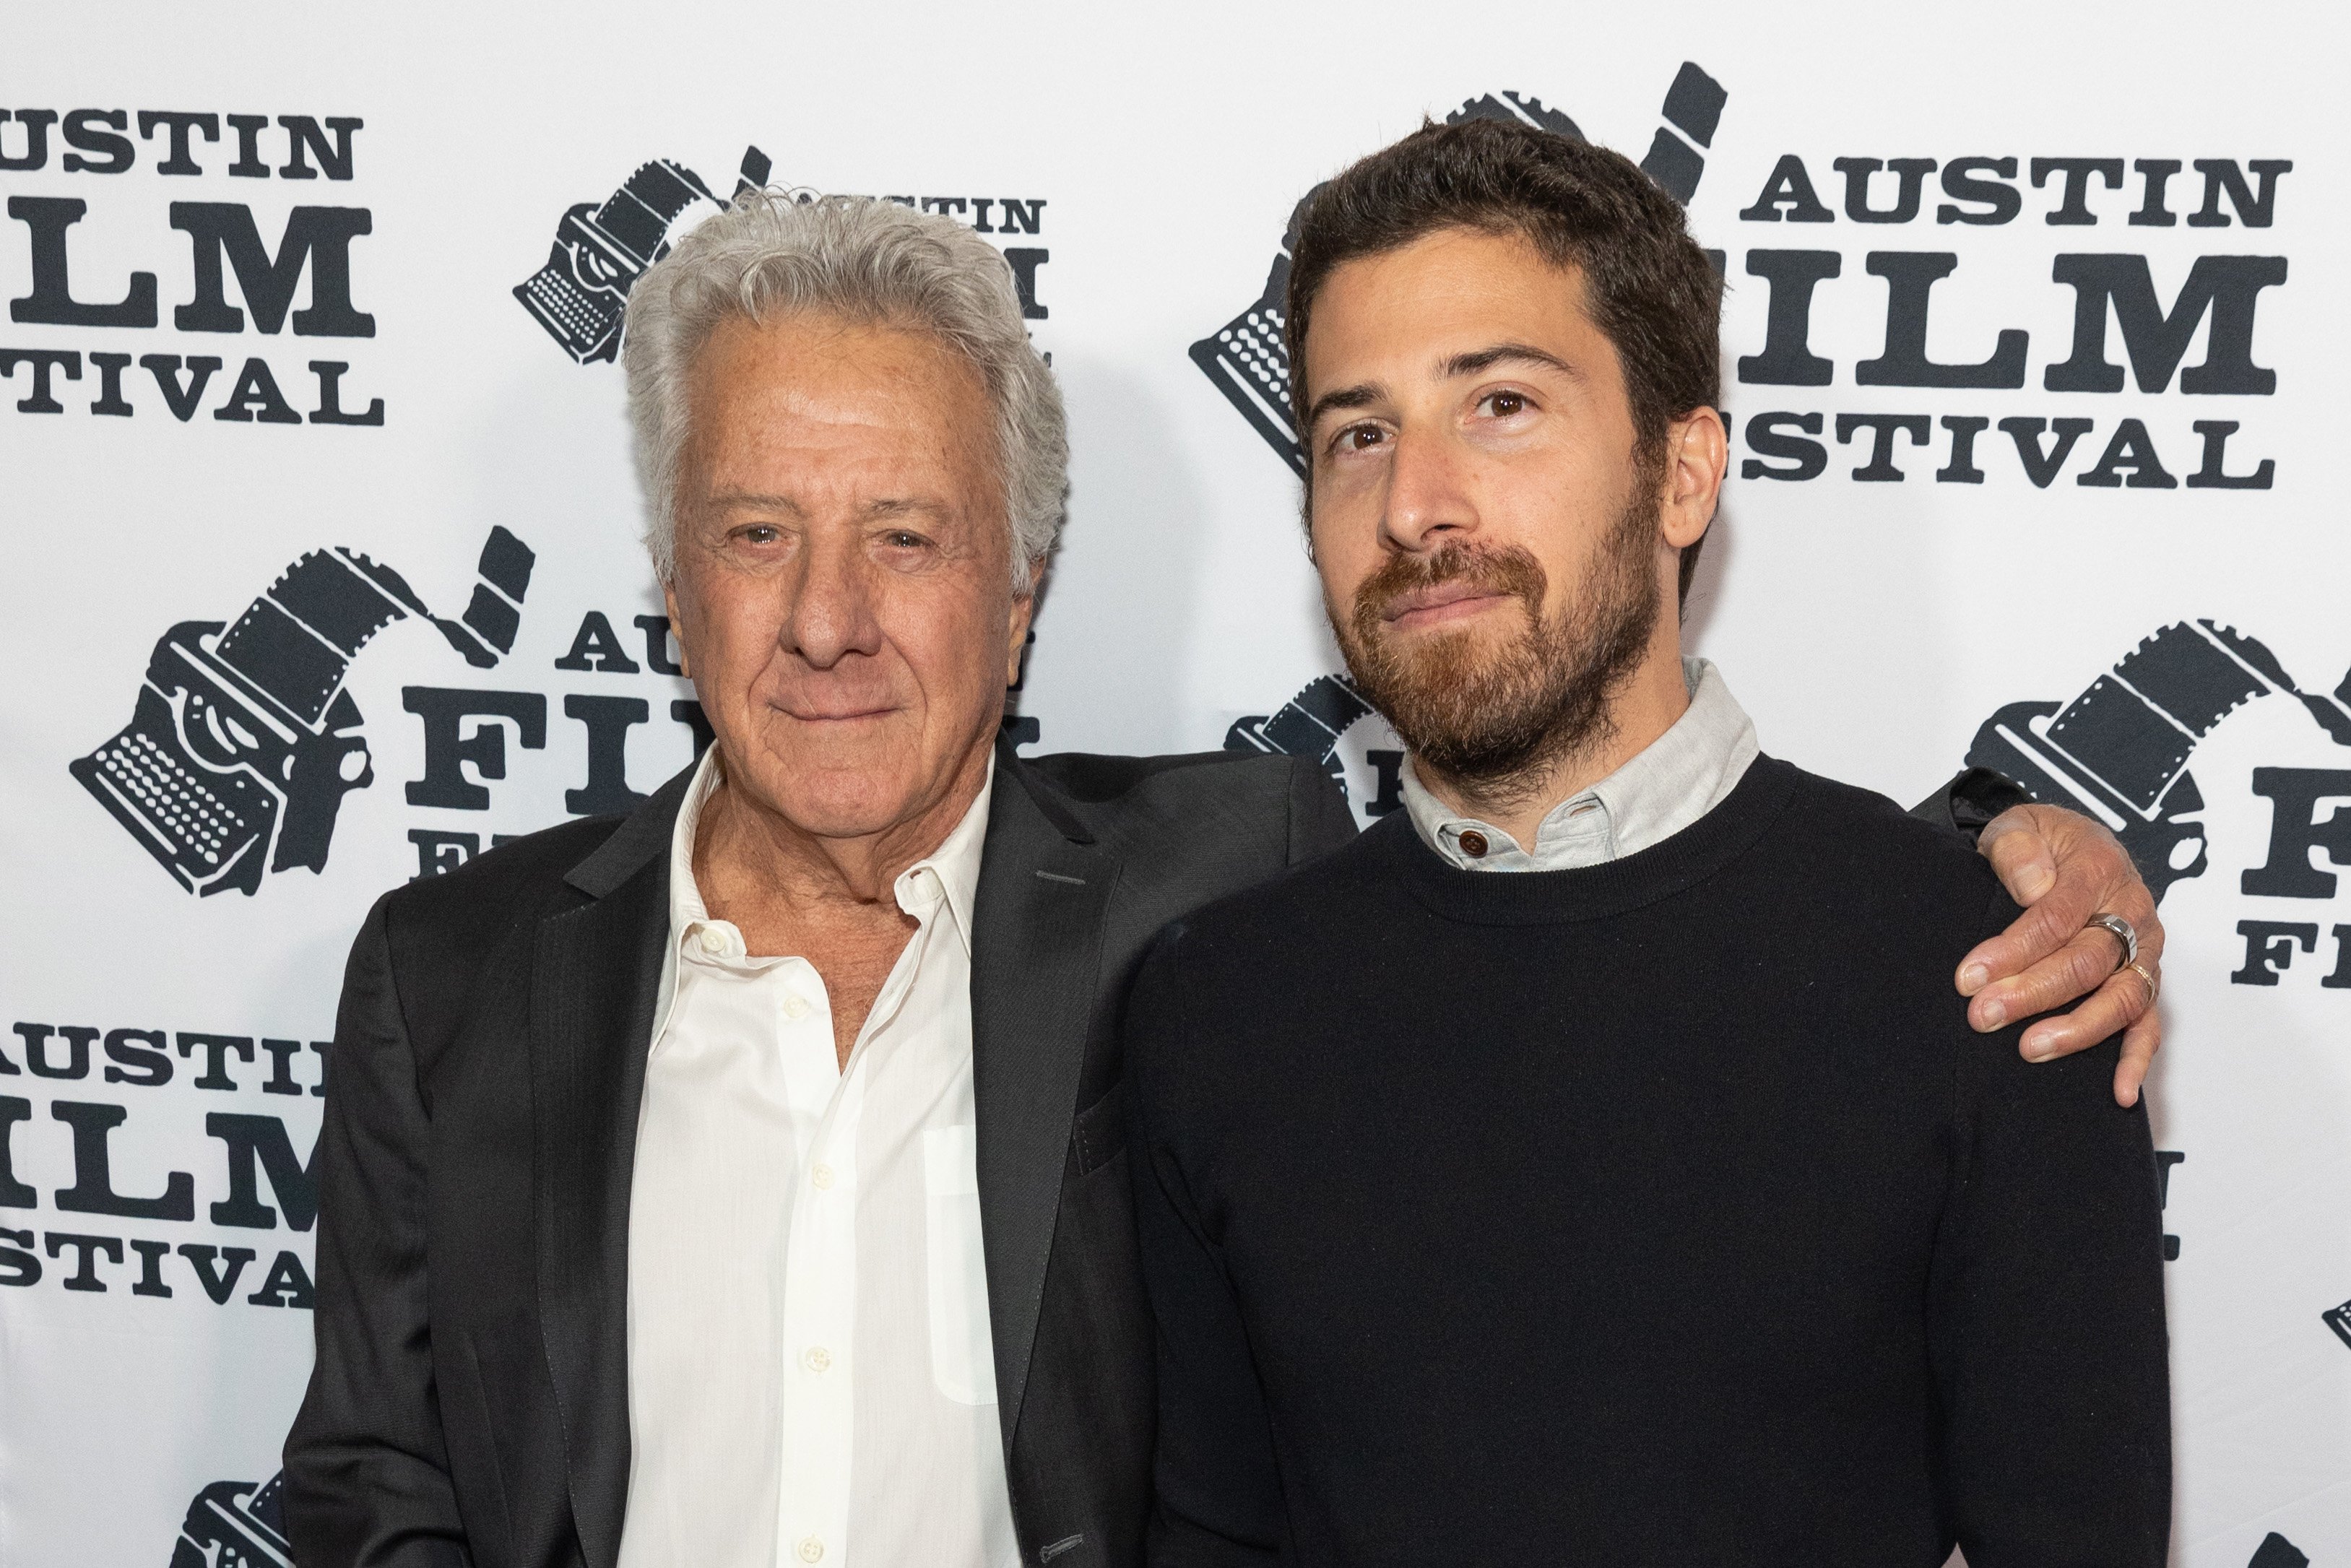 Dustin Hoffman (L) and Jake Hoffman attend the world premiere of "Sam & Kate" during the 2022 Austin Film Festival at Paramount Theatre on October 28, 2022 in Austin, Texas | Source: Getty Images